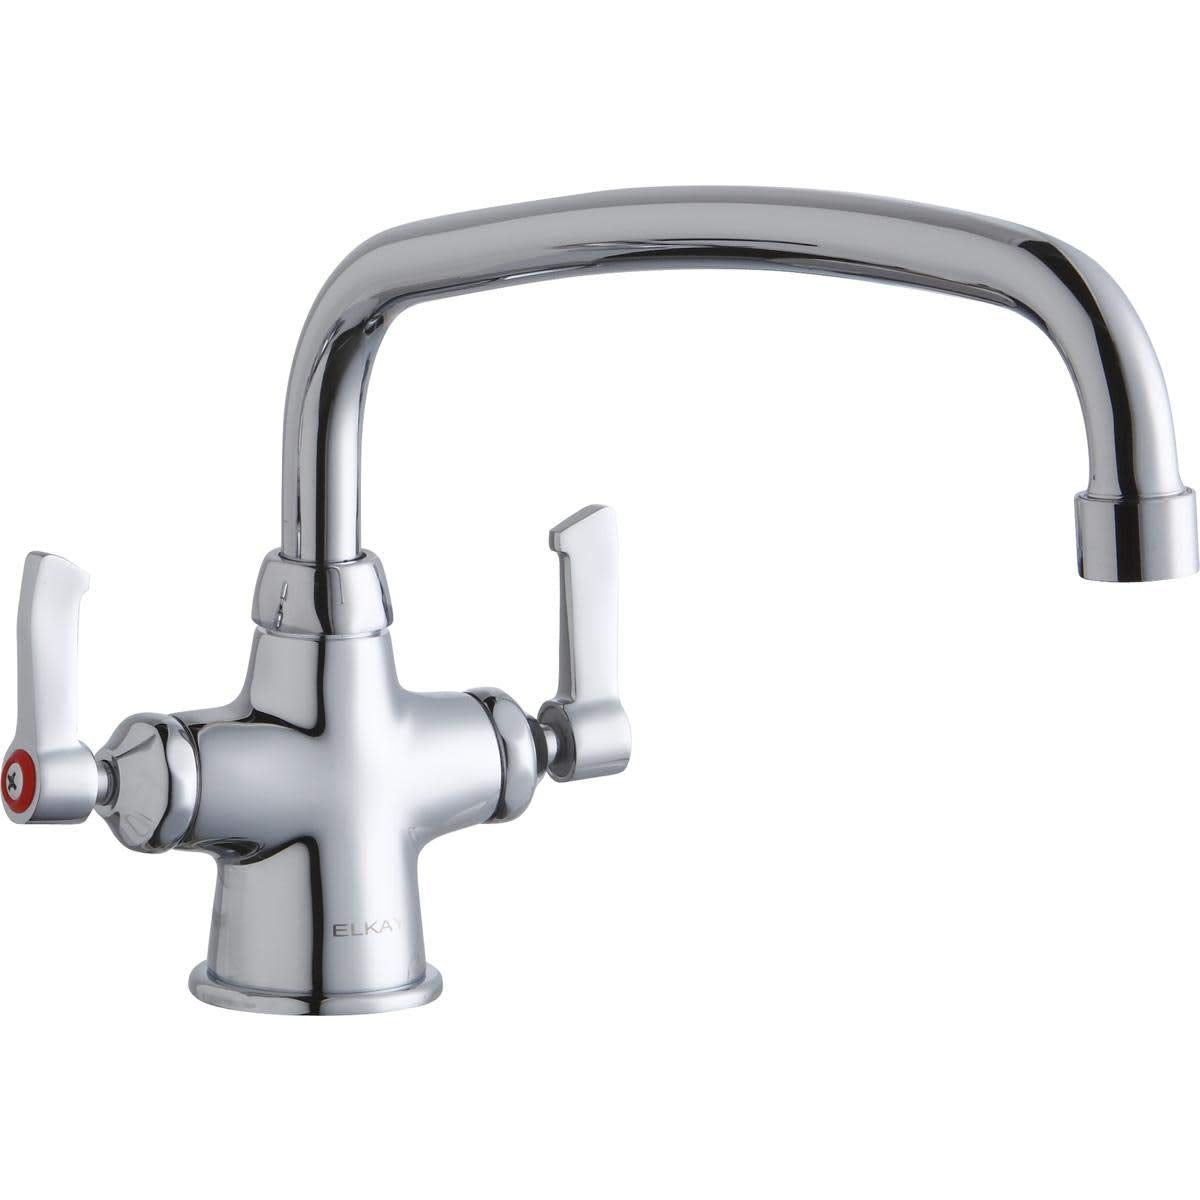 Elkay LK500AT14L2 Elkay Single Hole with Concealed Deck Faucet with 14" Arc Tube Spout 2" Lever Handles Chrome